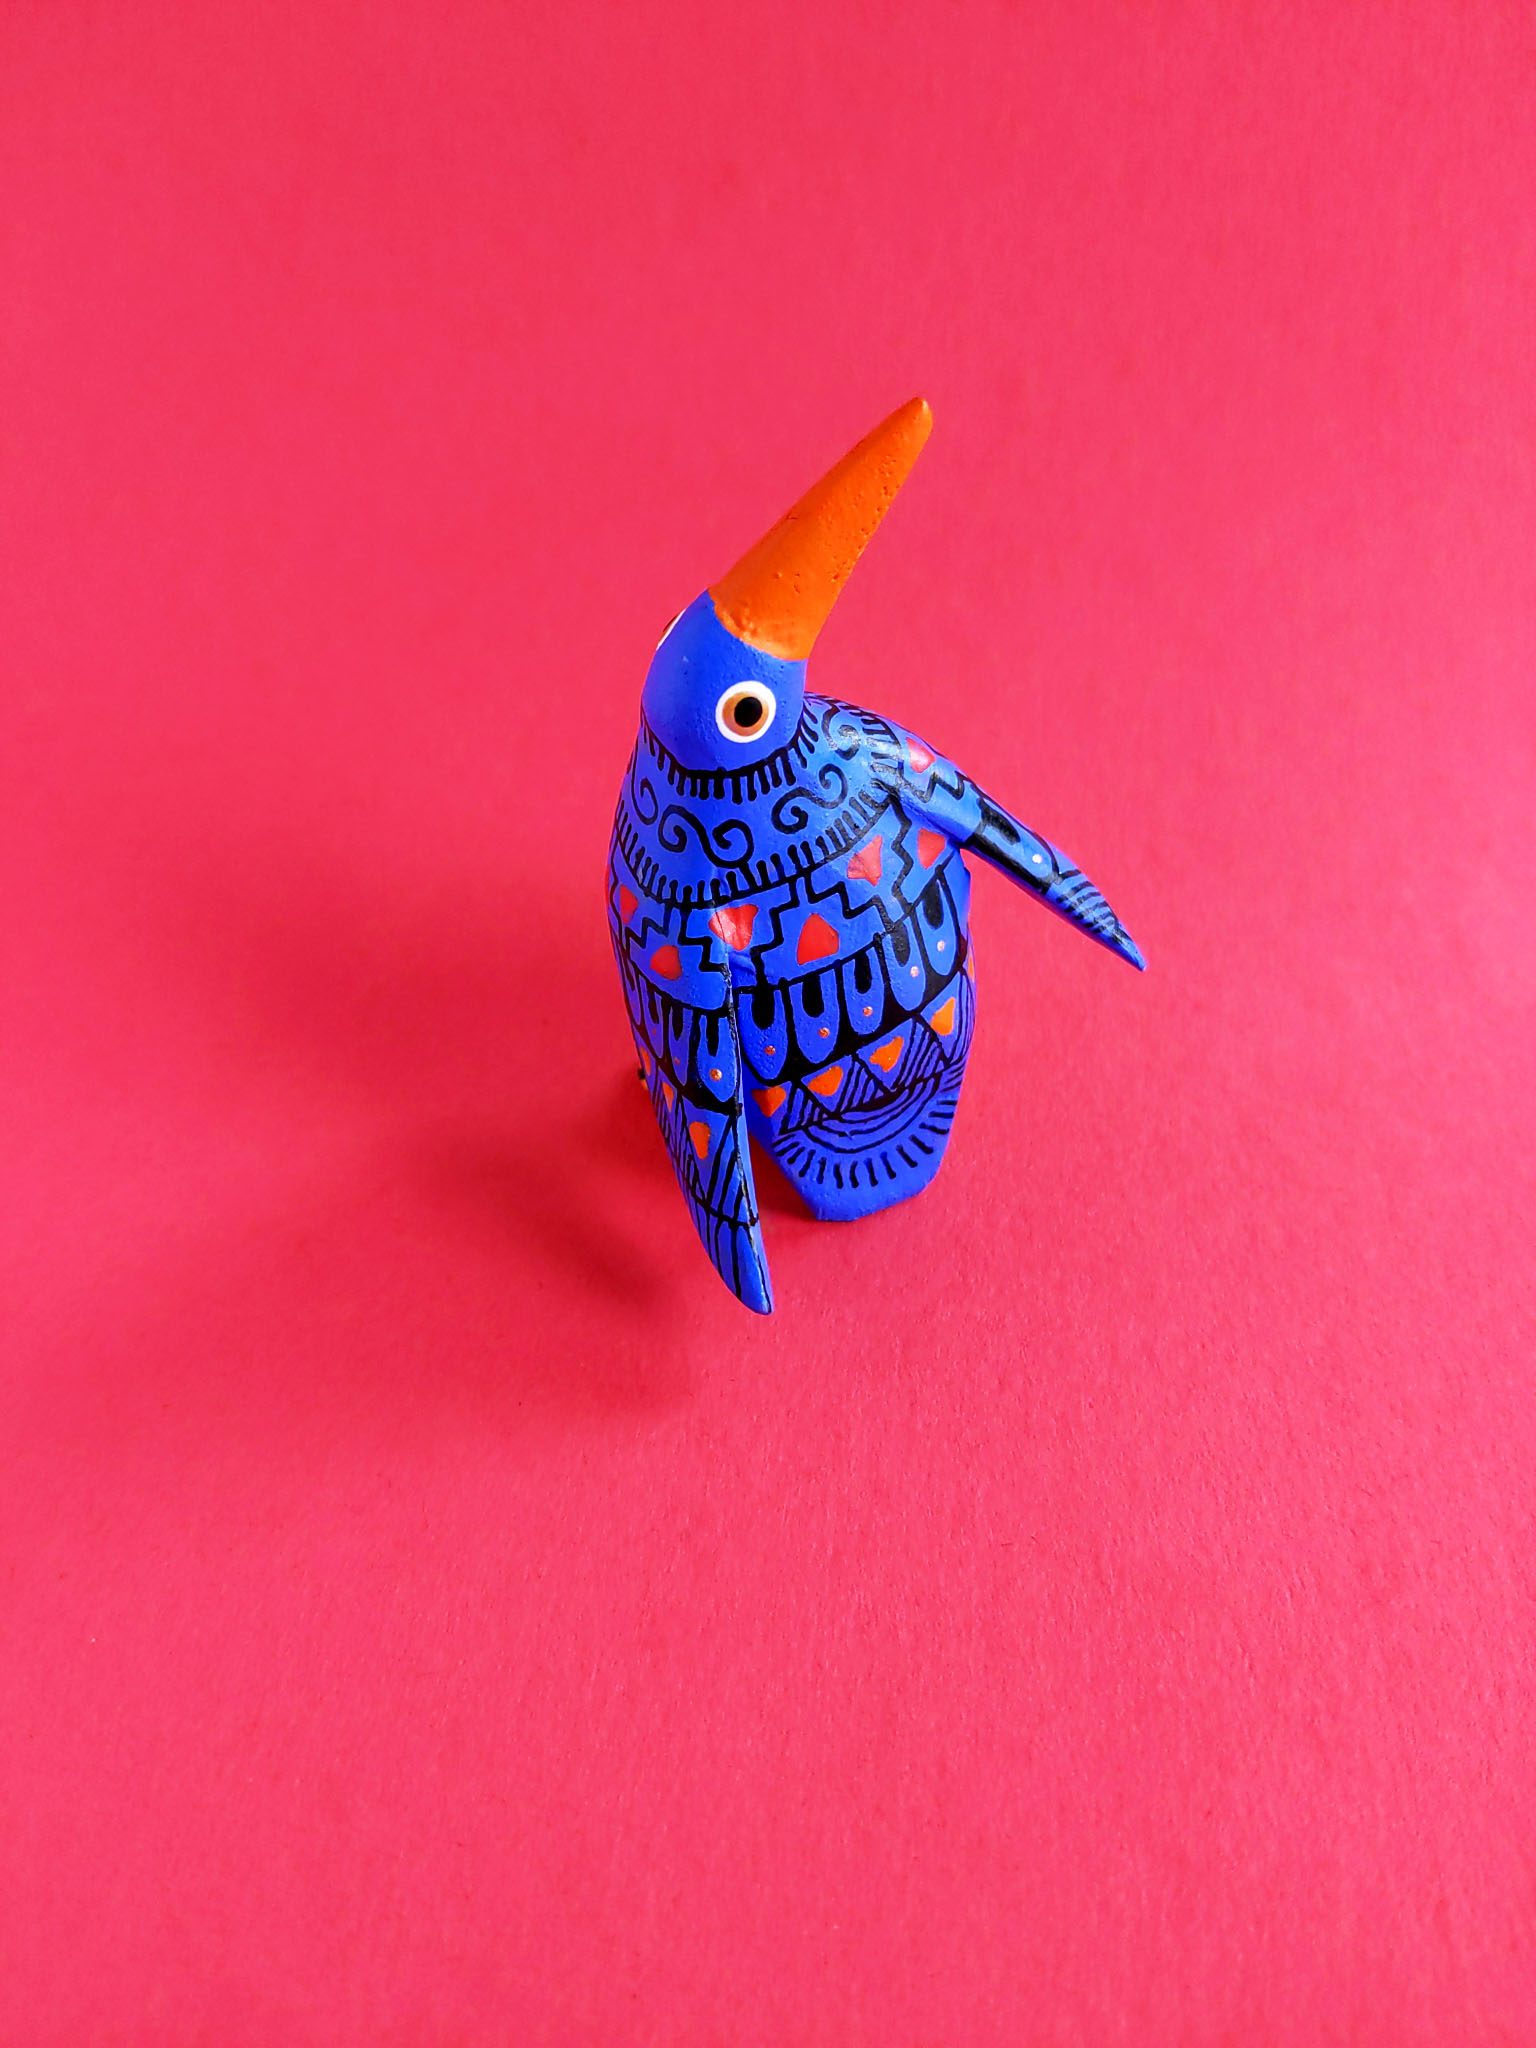 handcrafted small wooden bird with painted black, pink and orange detail against red plain background